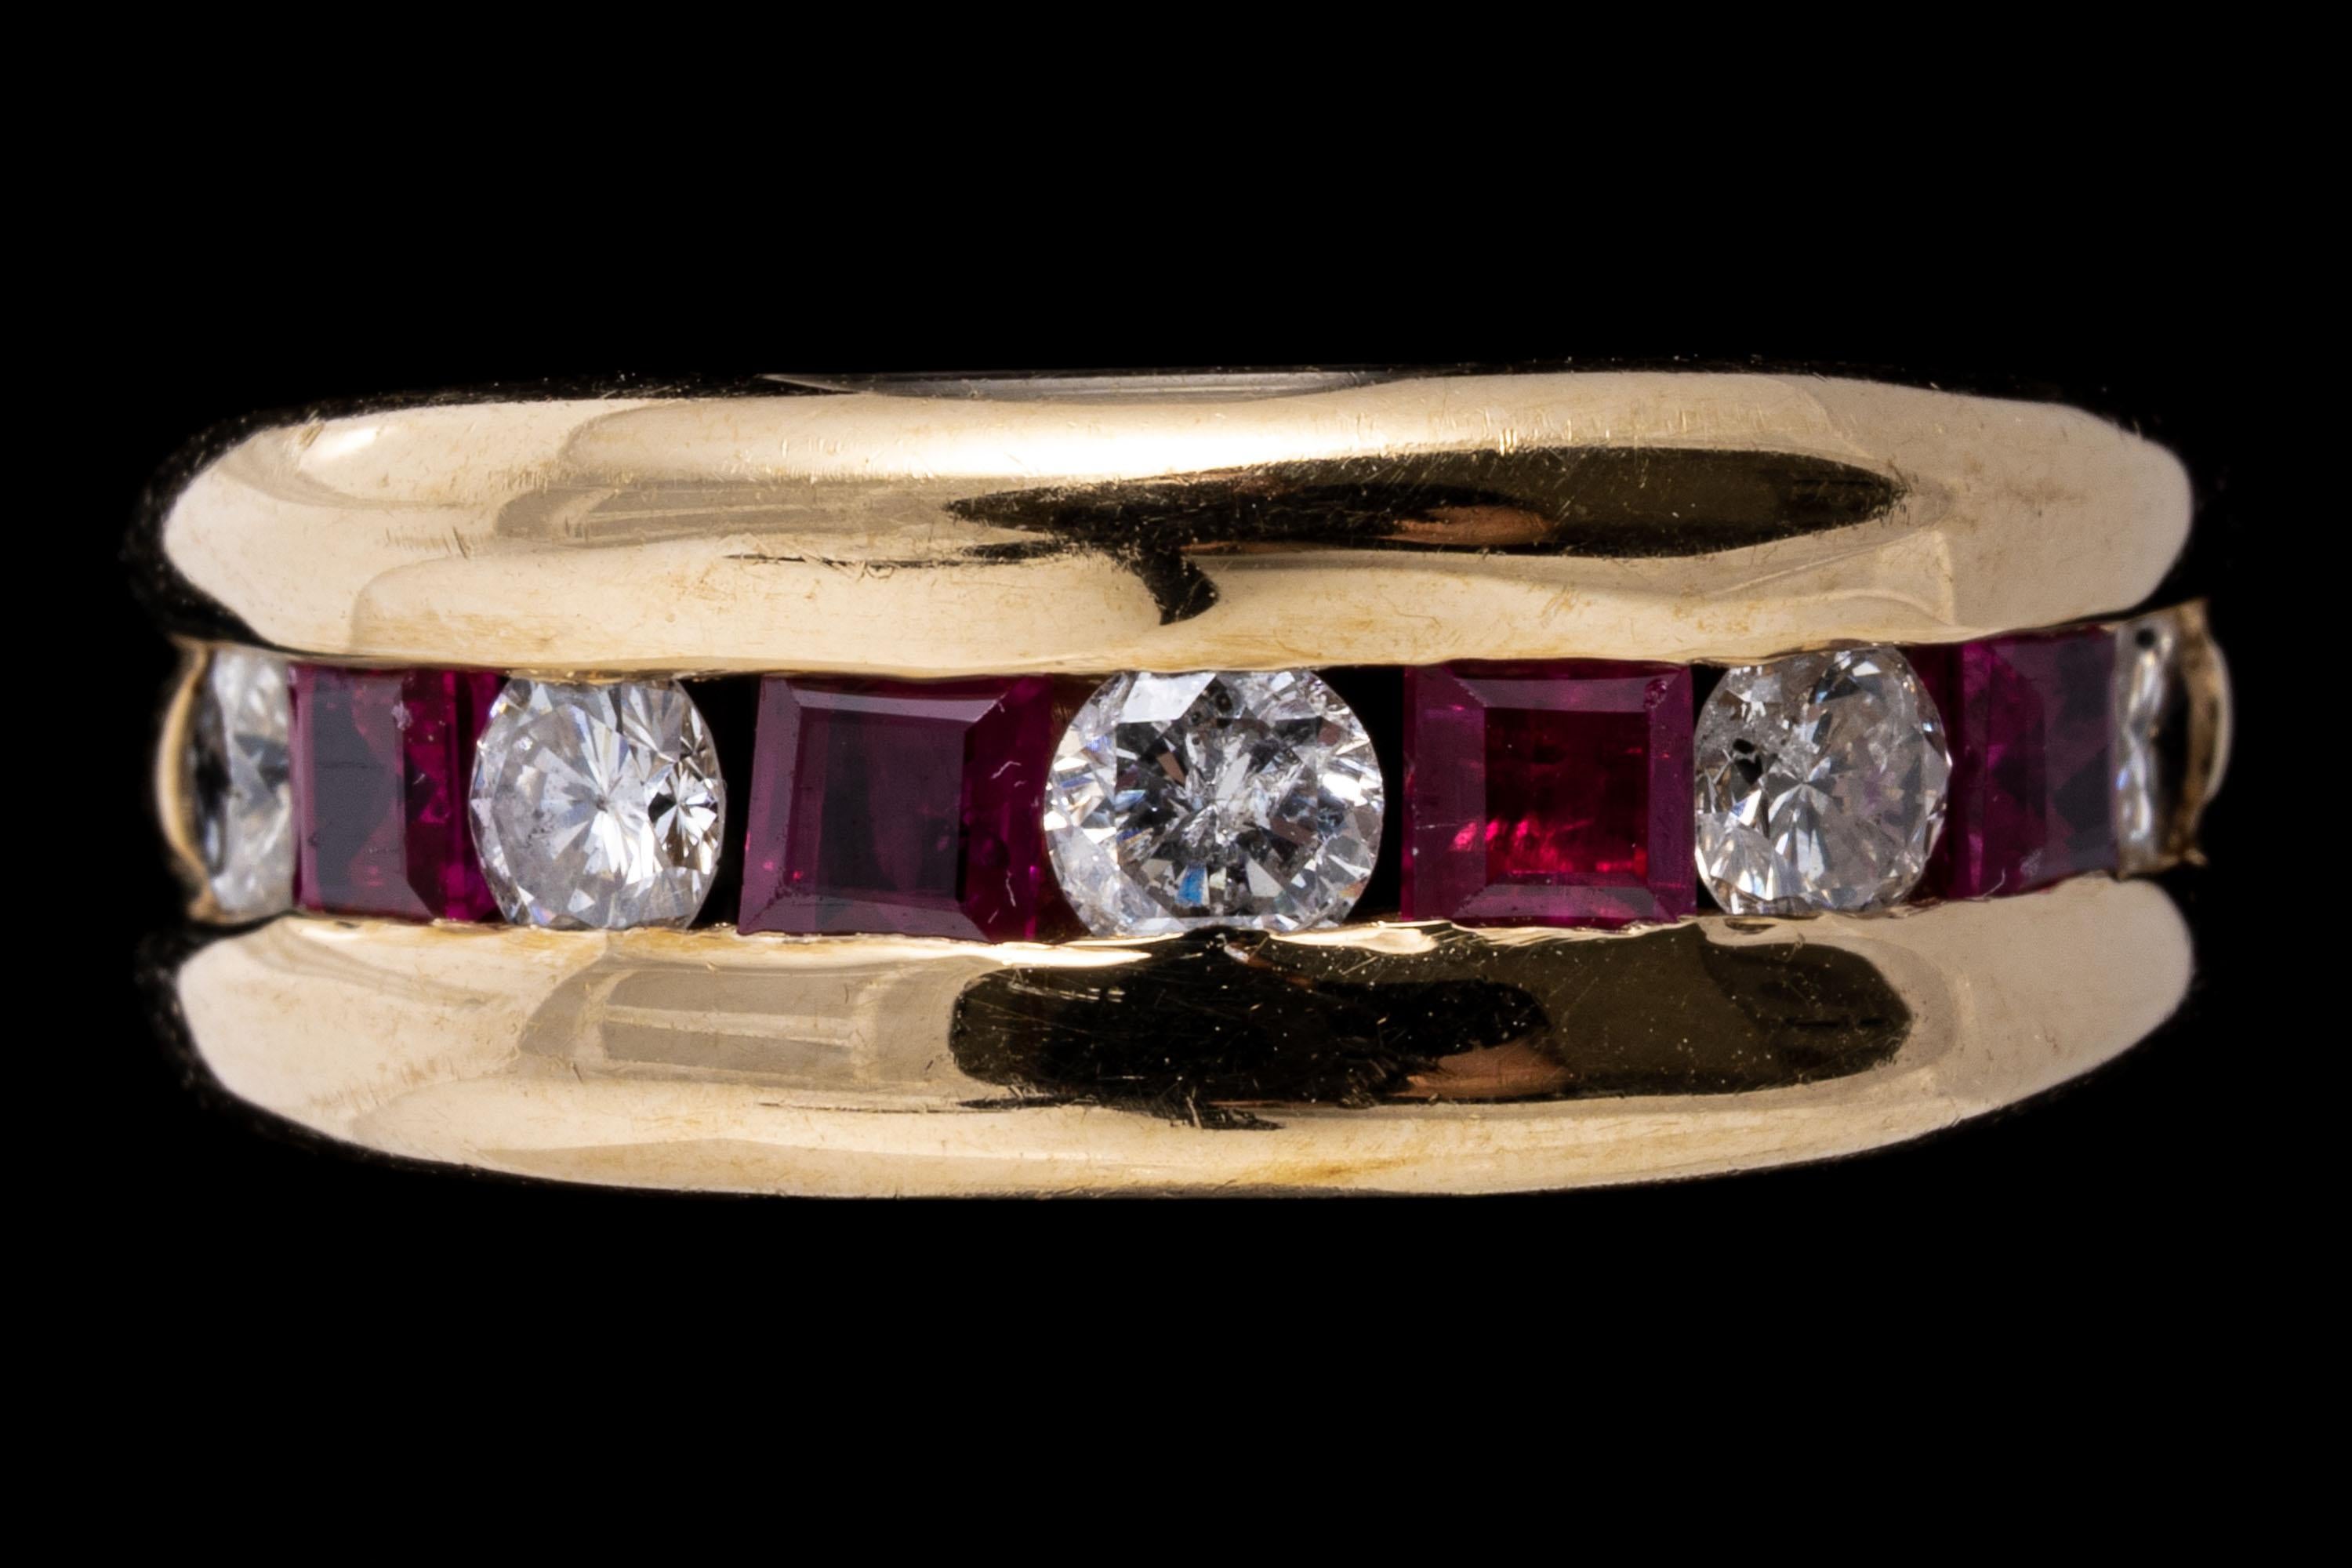 14k yellow gold ring. 14k yellow gold beautiful wide bezel, channel set band ring set with round brilliant cut diamonds, approximately 0.50 TCW, alternating with square faceted, pinkish red color rubies, approximately 0.64 TCW. 
Marks: